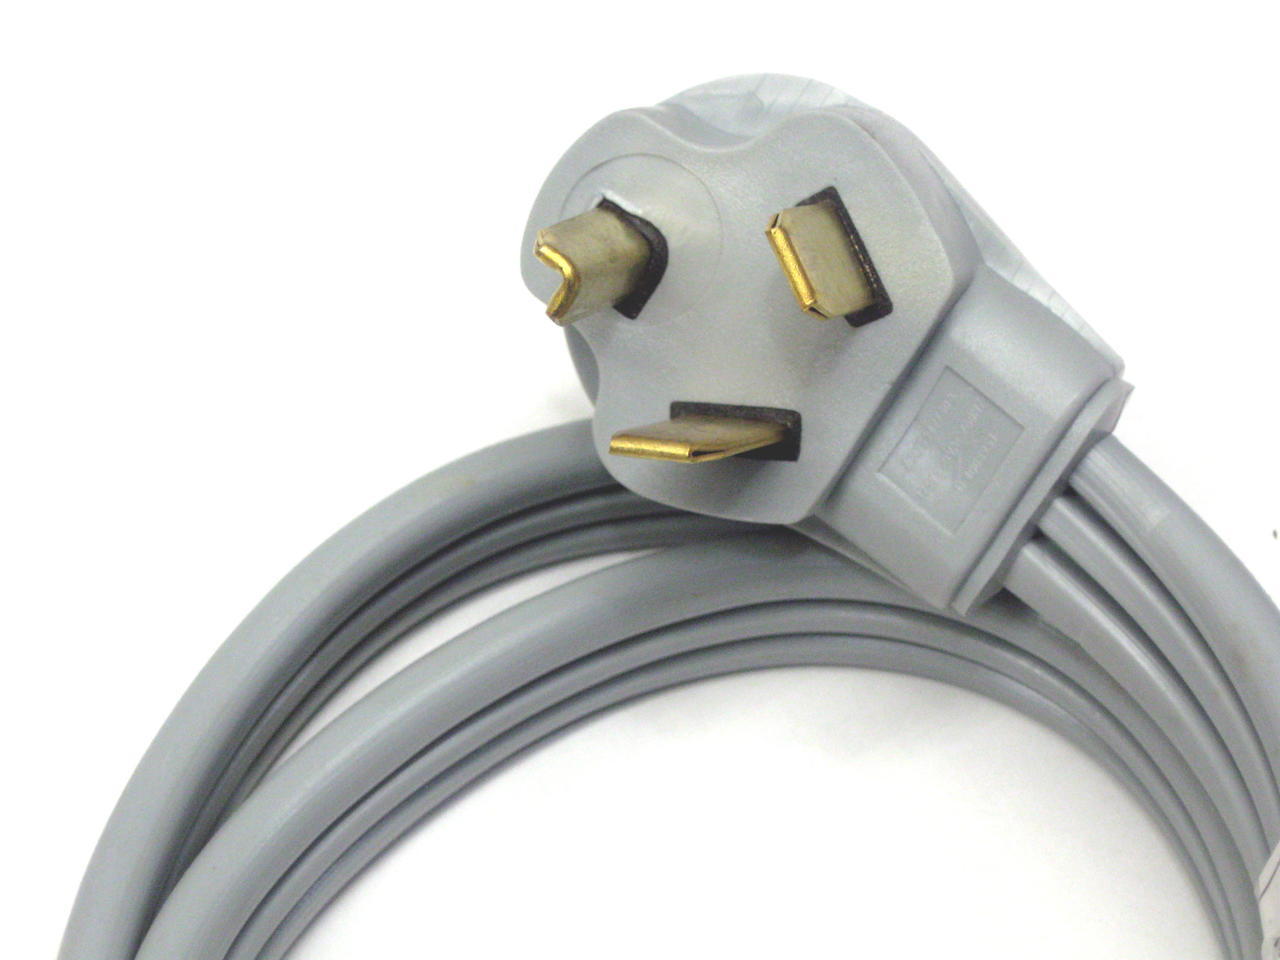 3-prong dryer cord